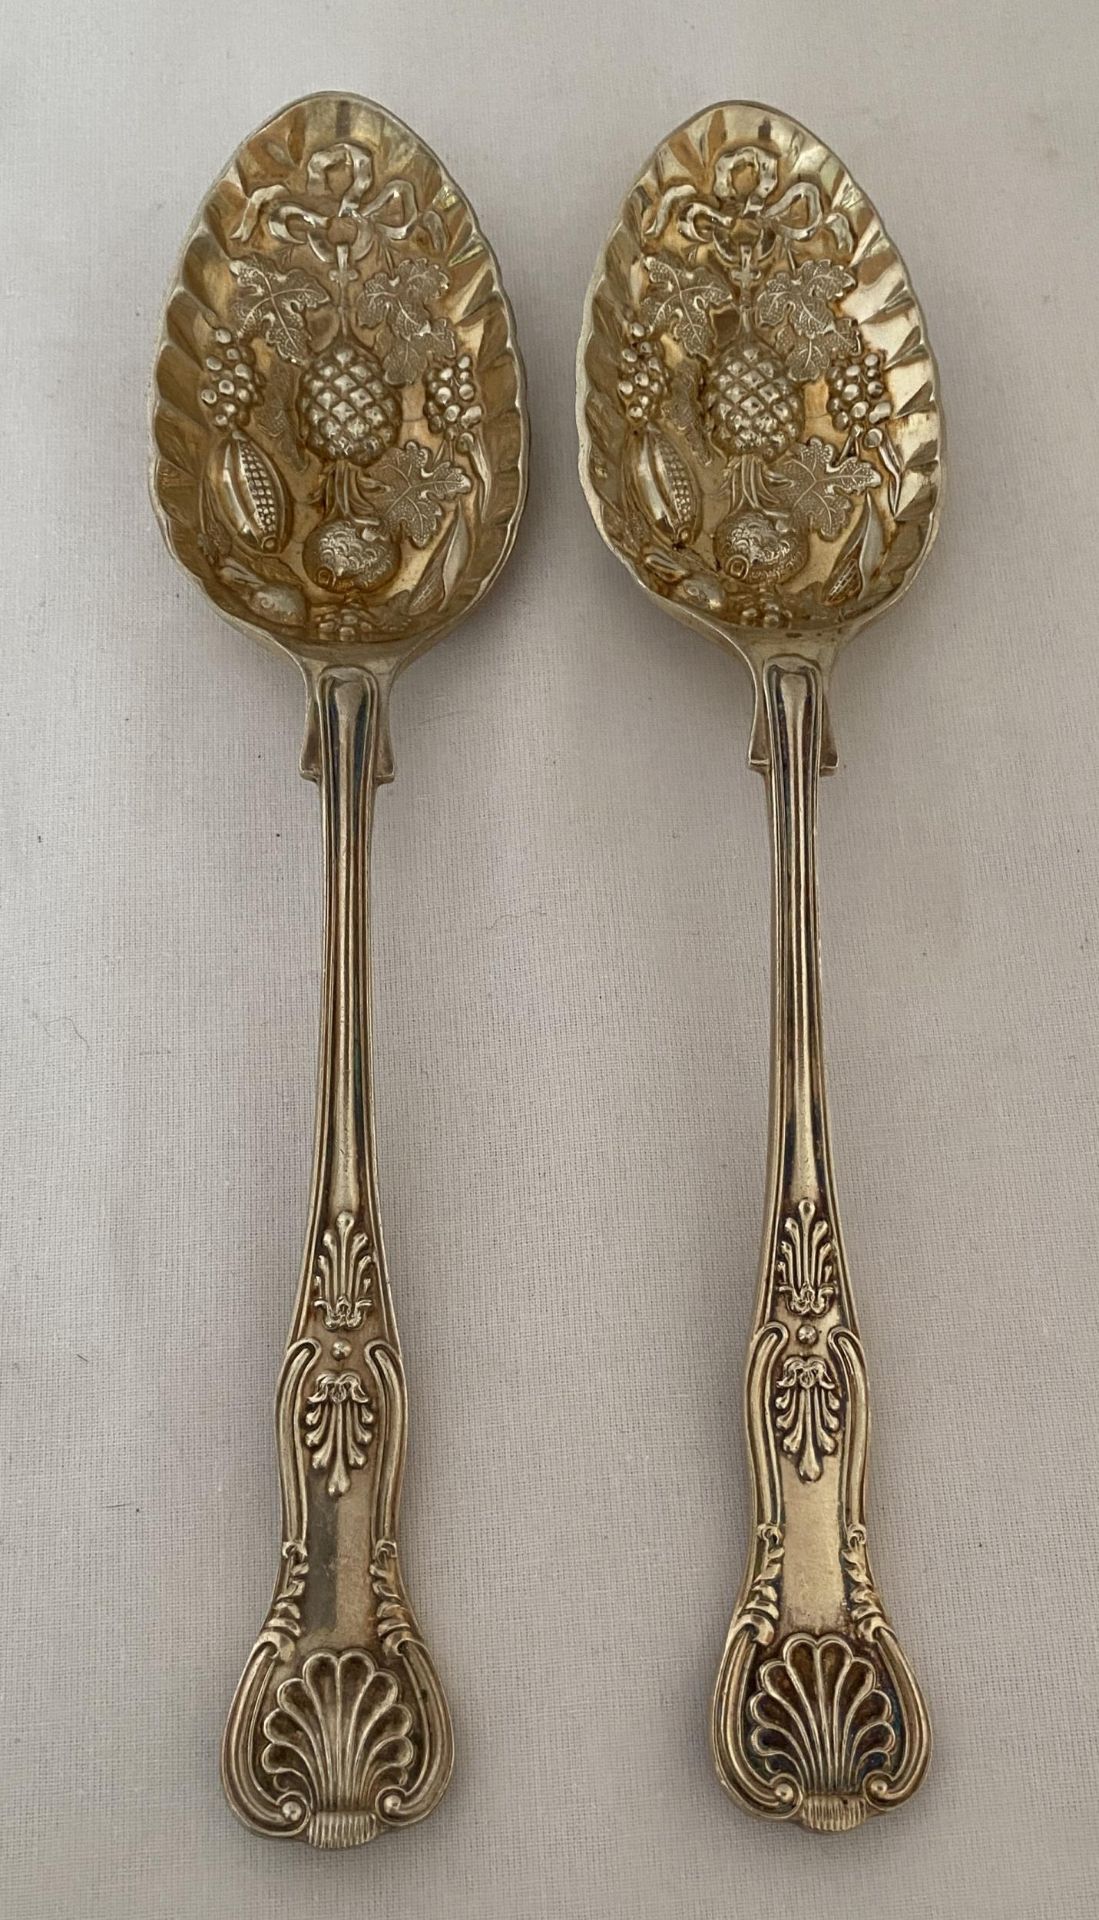 A PAIR OF ELIZABETH II 1972 HALLMARKED SHEFFIELD SILVER BERRY SPOONS, MAKER COOPER BROTHERS & SONS - Image 2 of 12